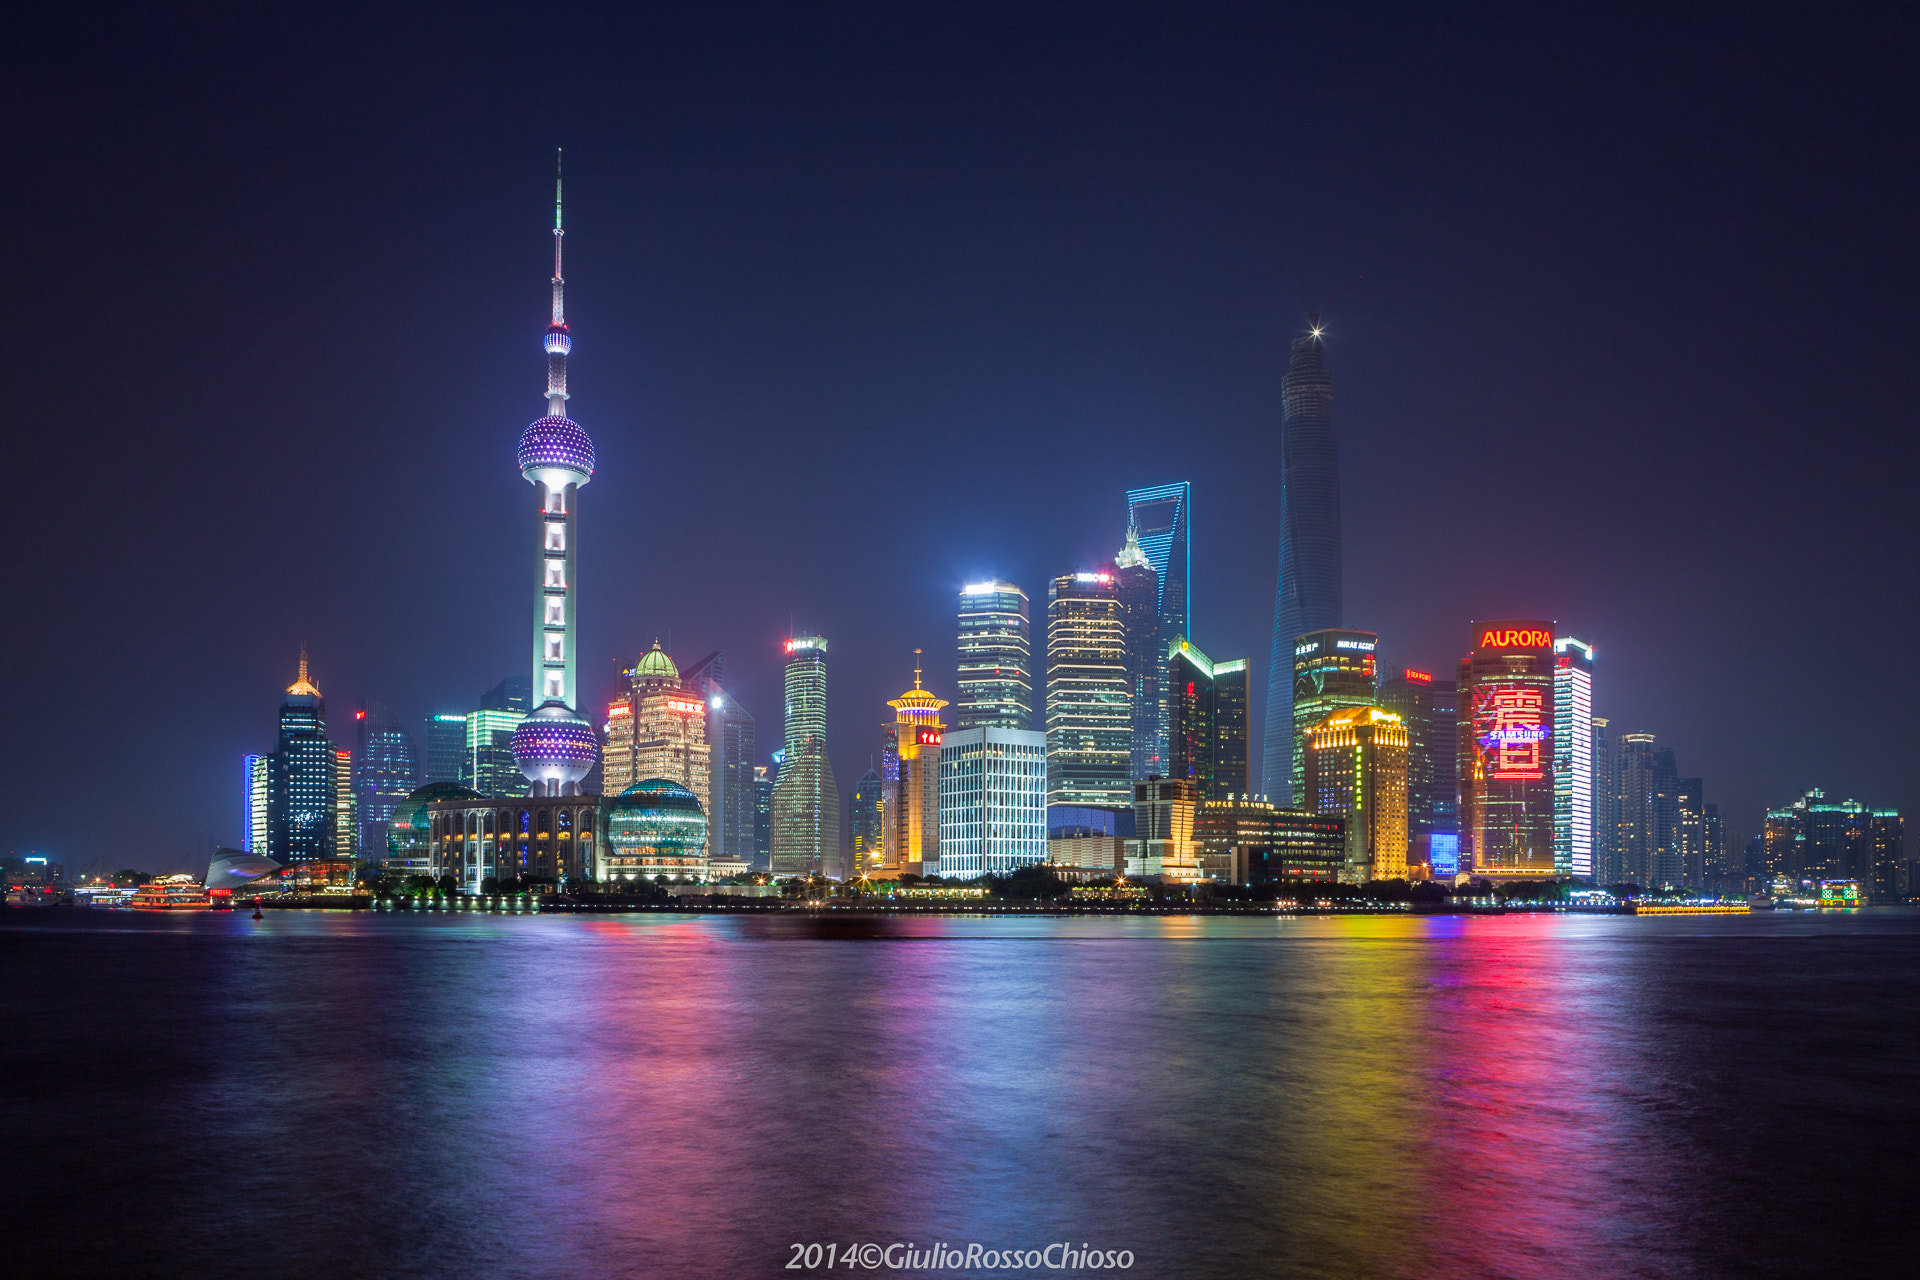 Shanghai #1 - Pudong New Area by Giulio Rosso Chioso / 500px